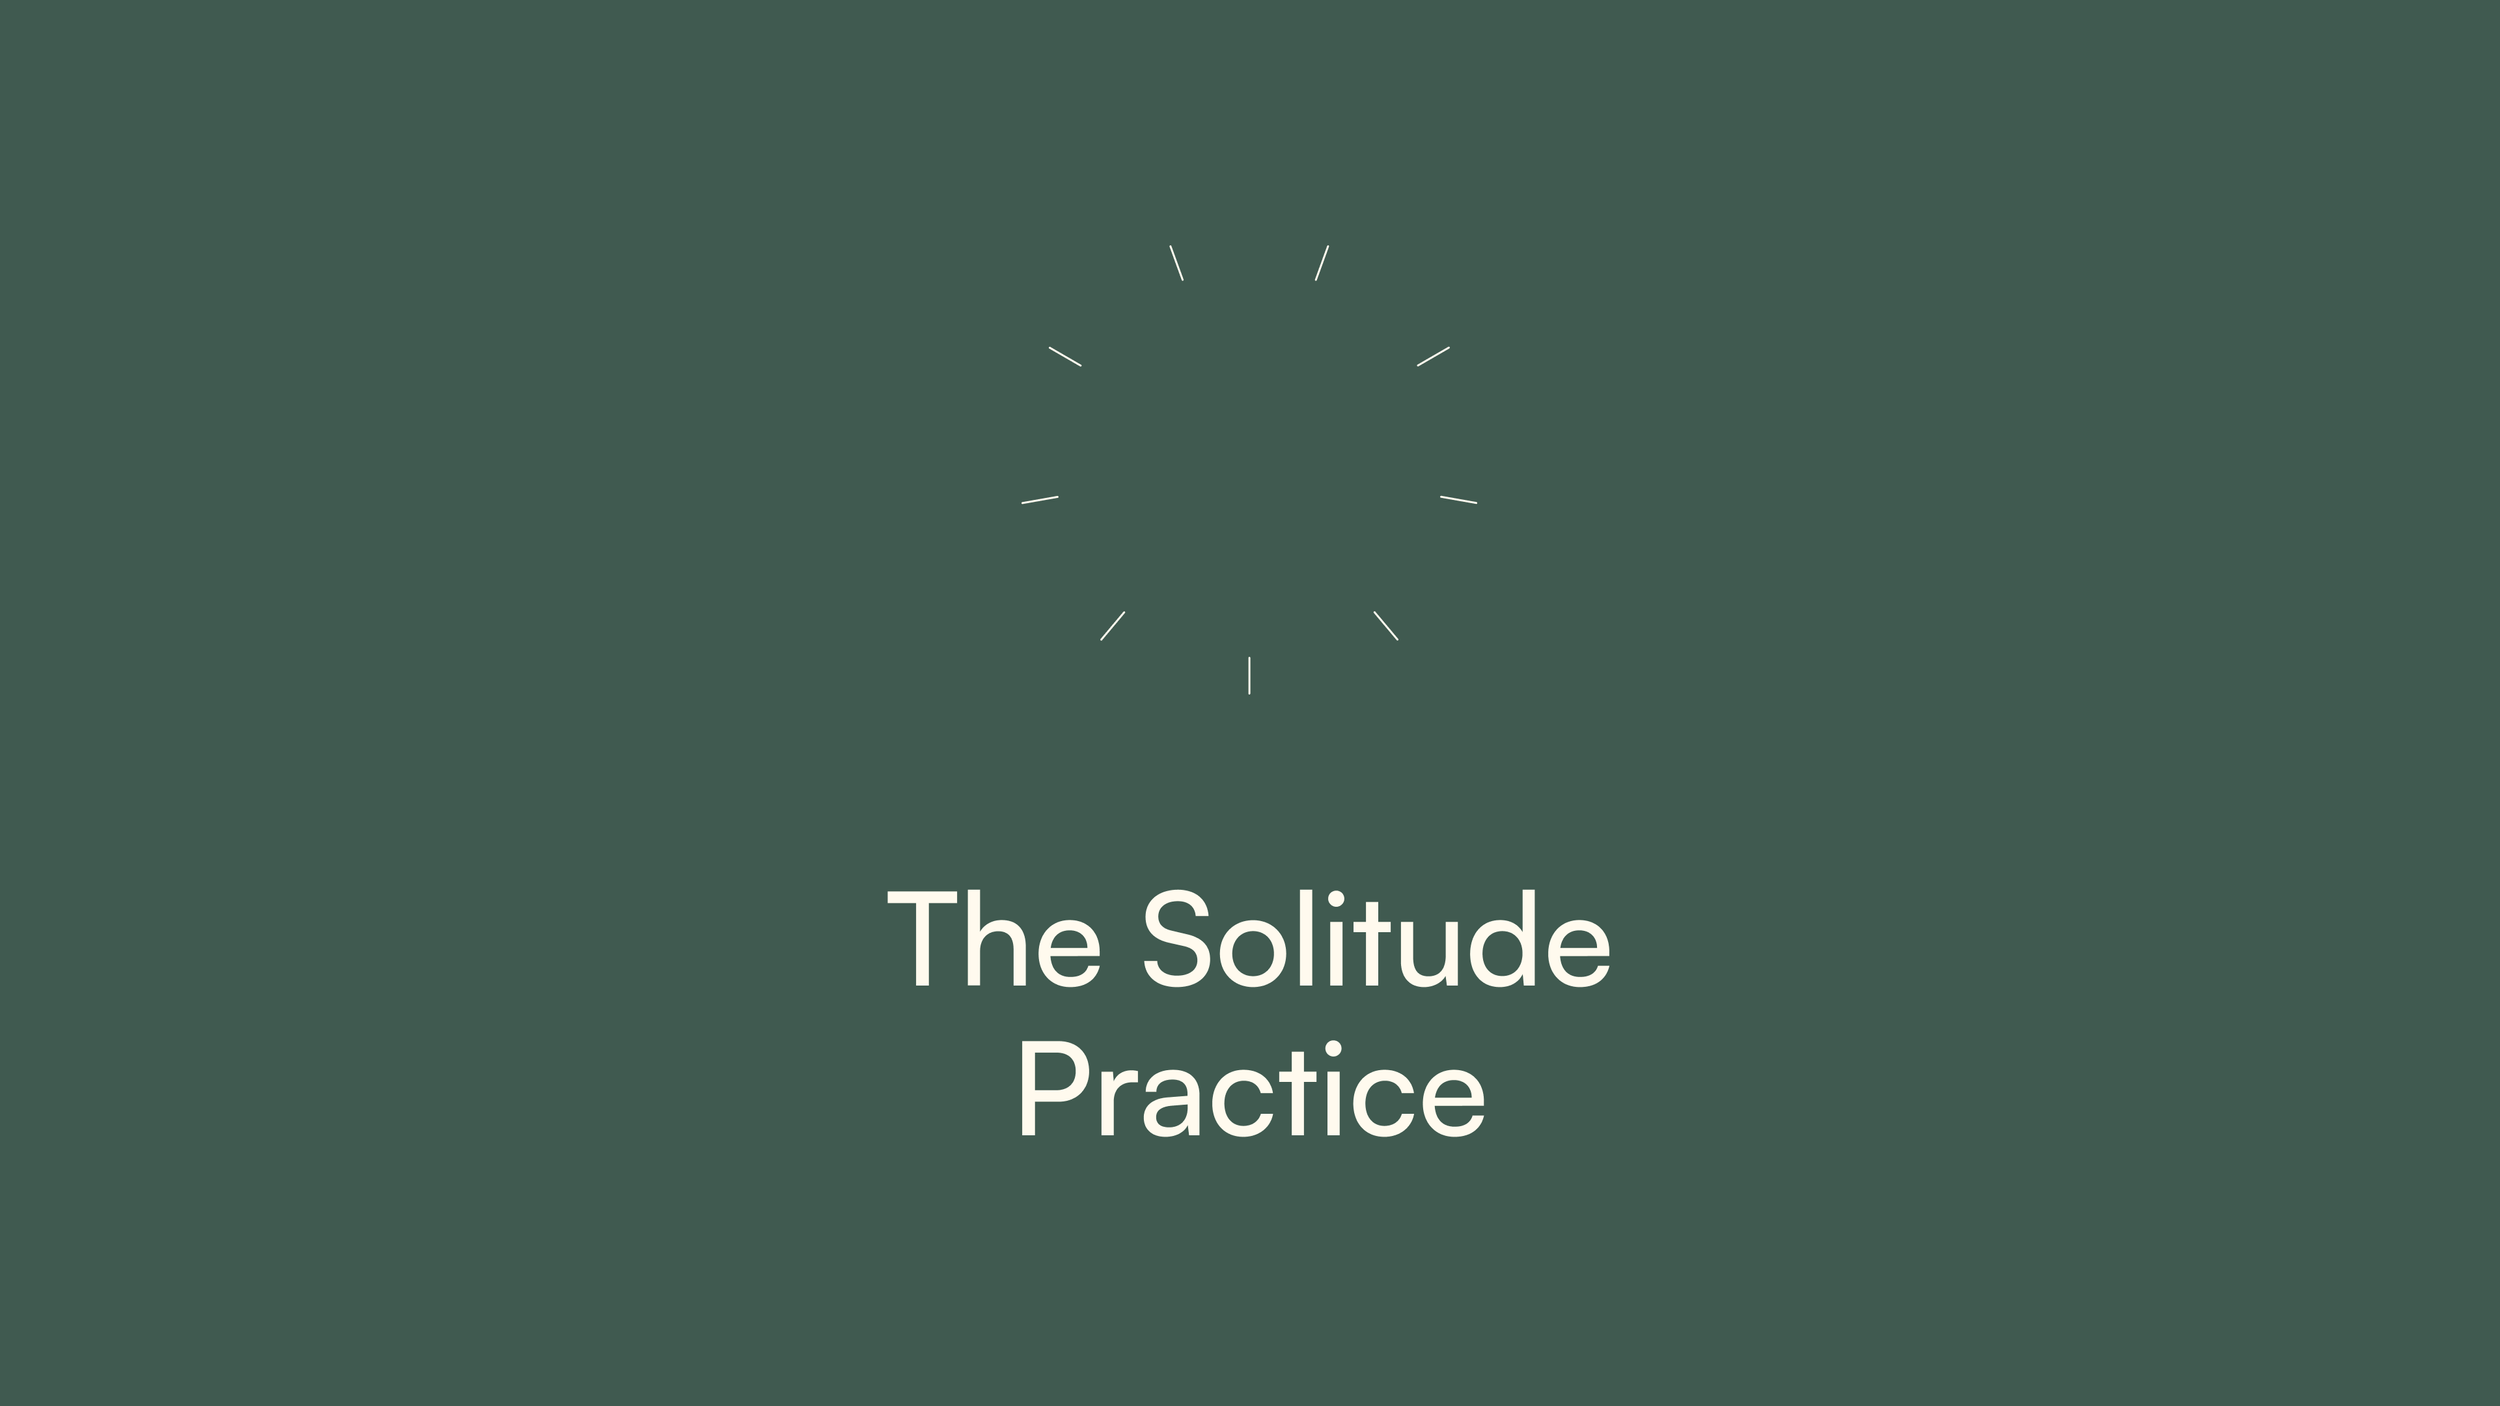  A 4 WEEK COURSE LOOKING AT THE PRACTICE OF SOLITUDE 